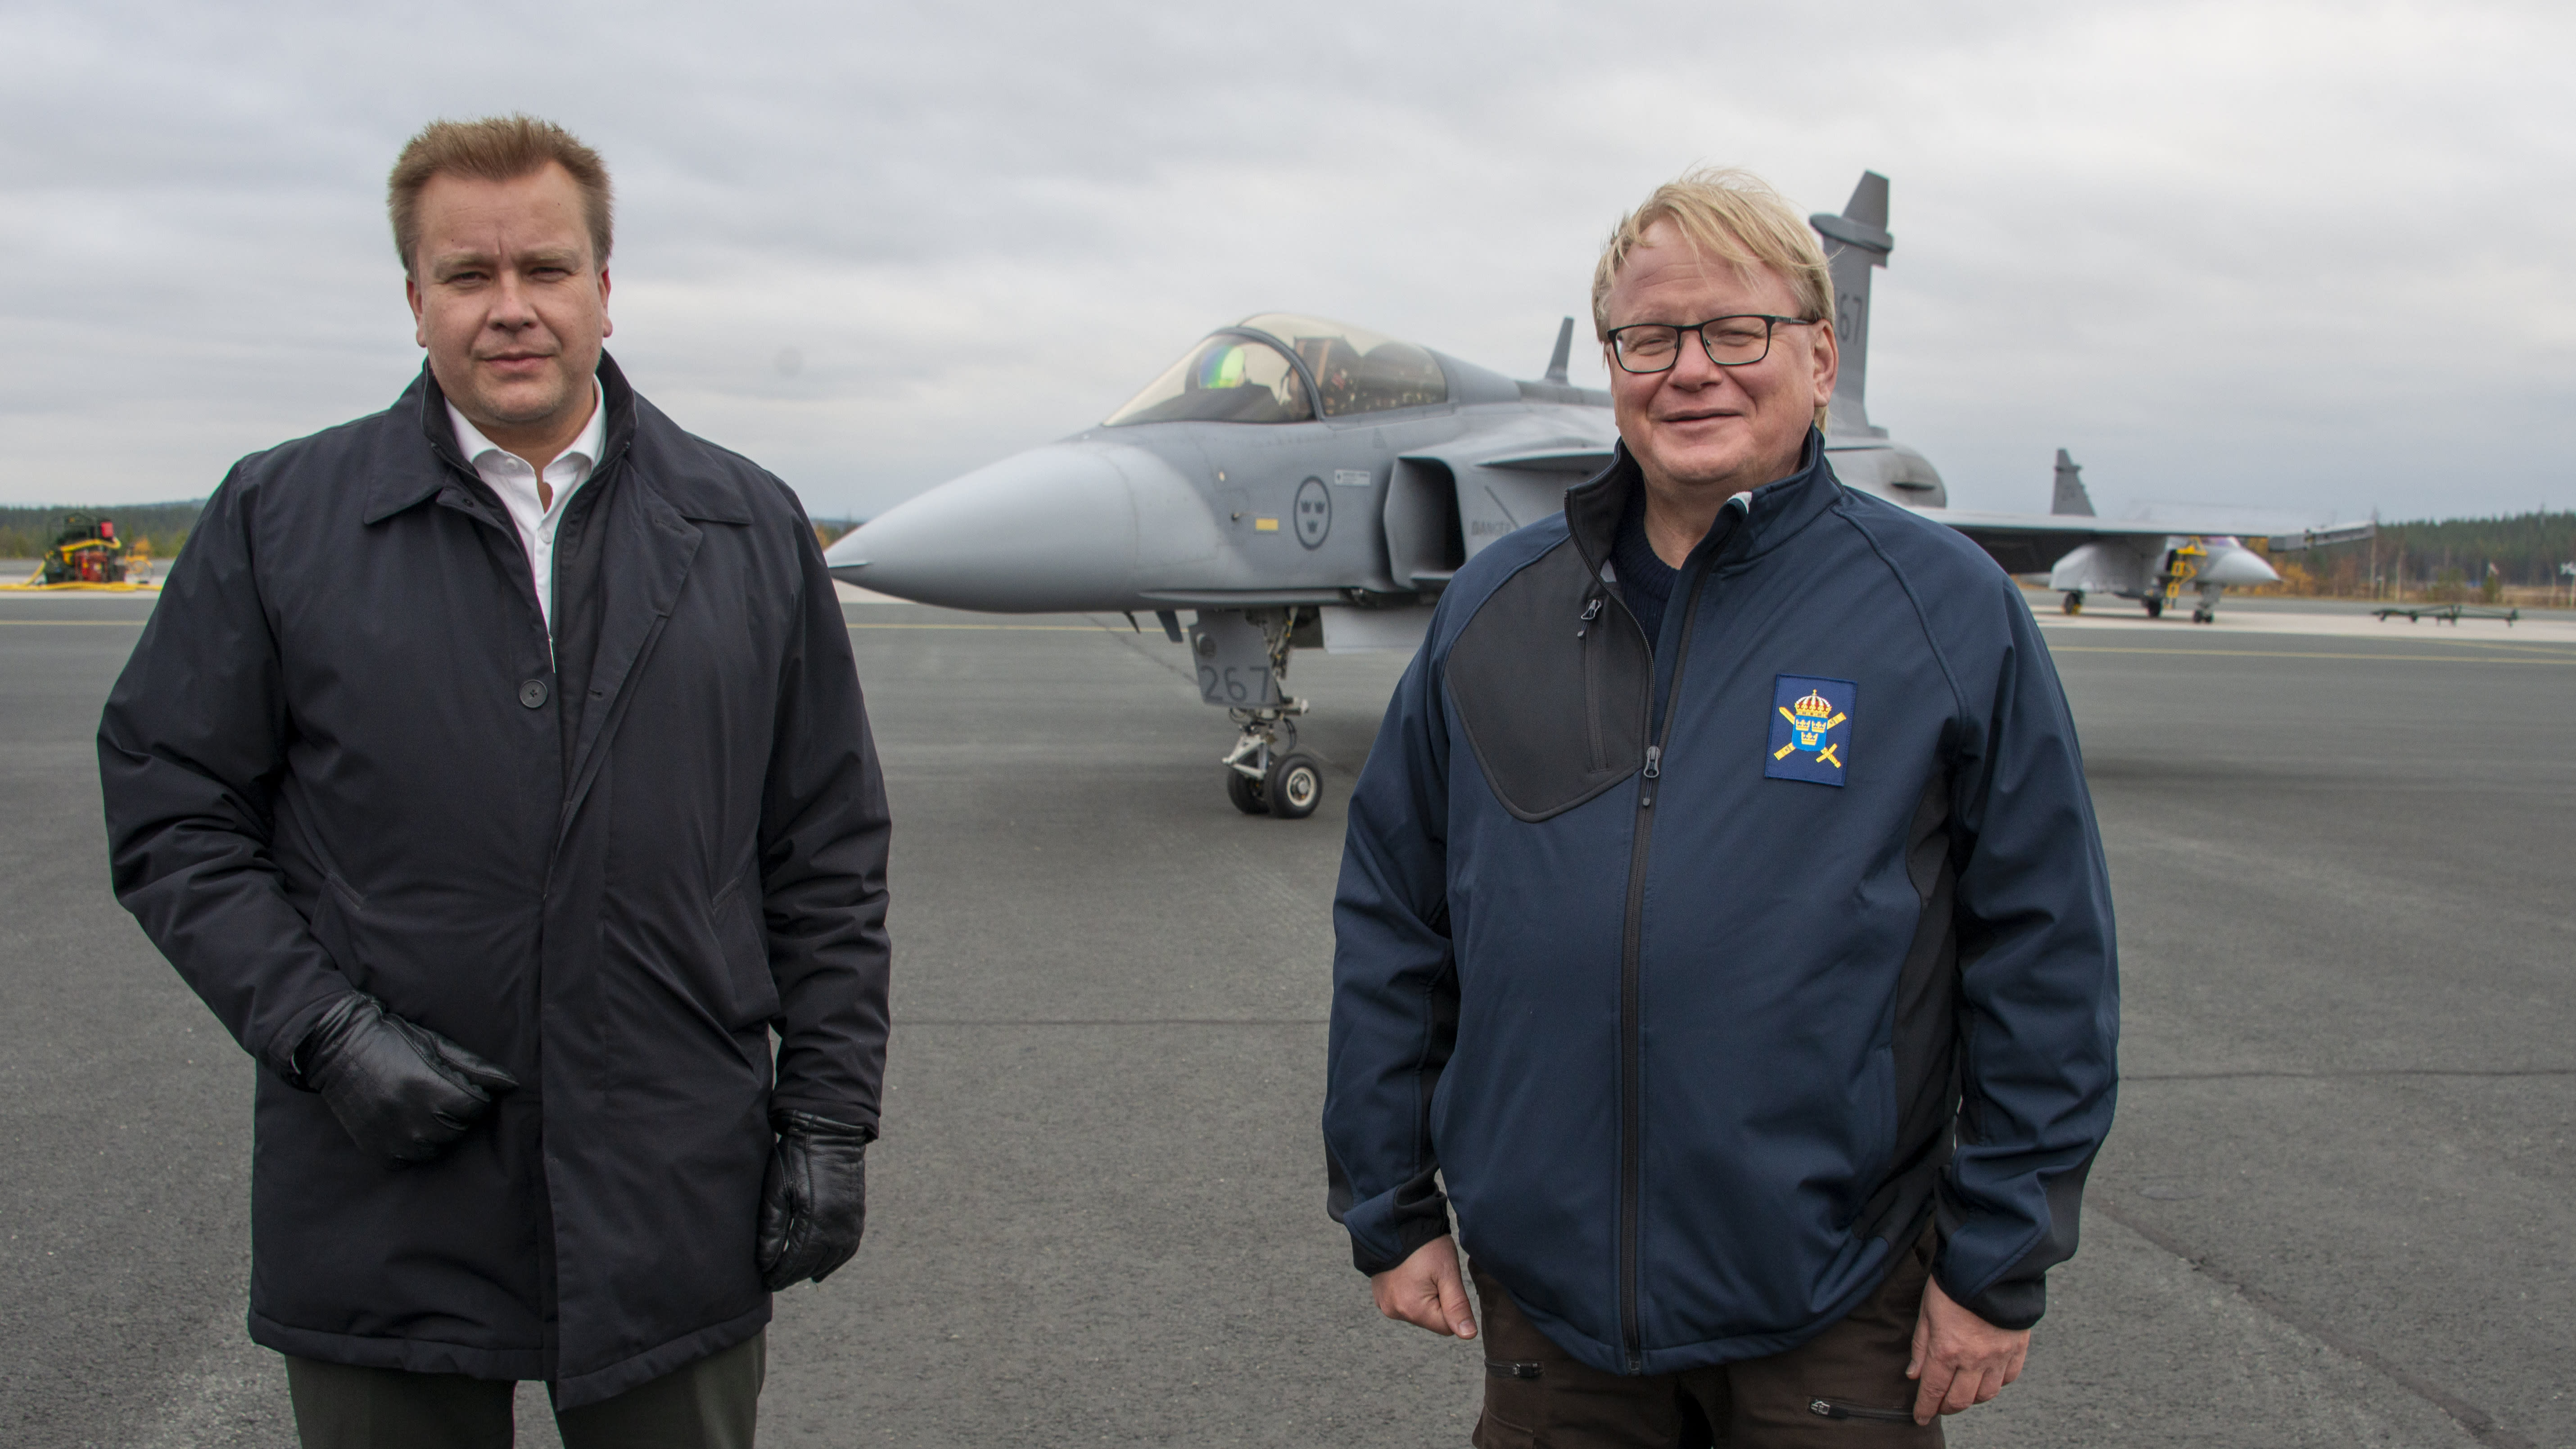 The Finnish and Swedish defense ministers talk about security, mutual co-operation